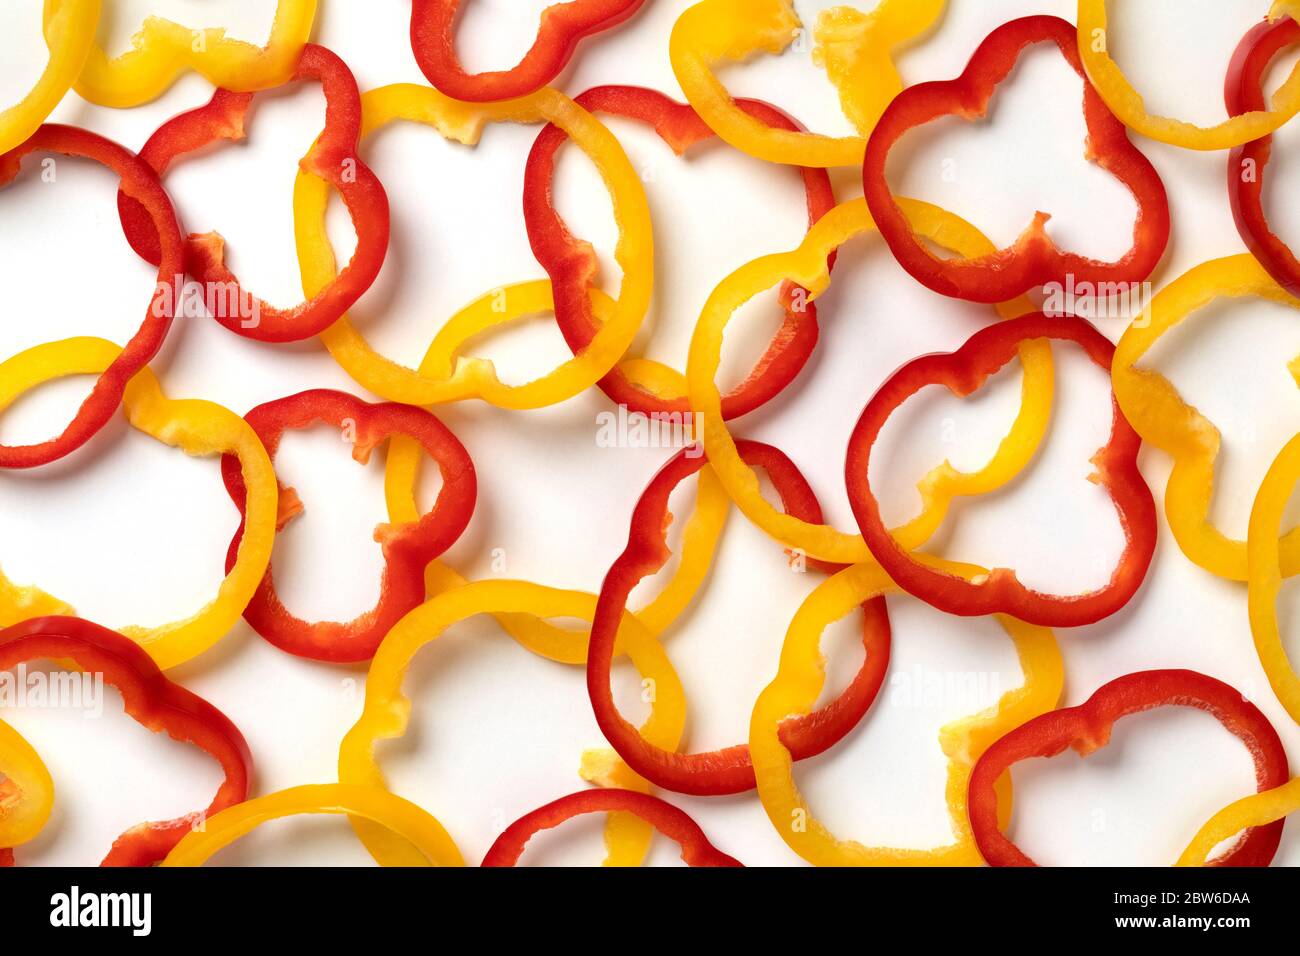 Fresh cut rings of red and yellow bell pepper close up on white background Stock Photo